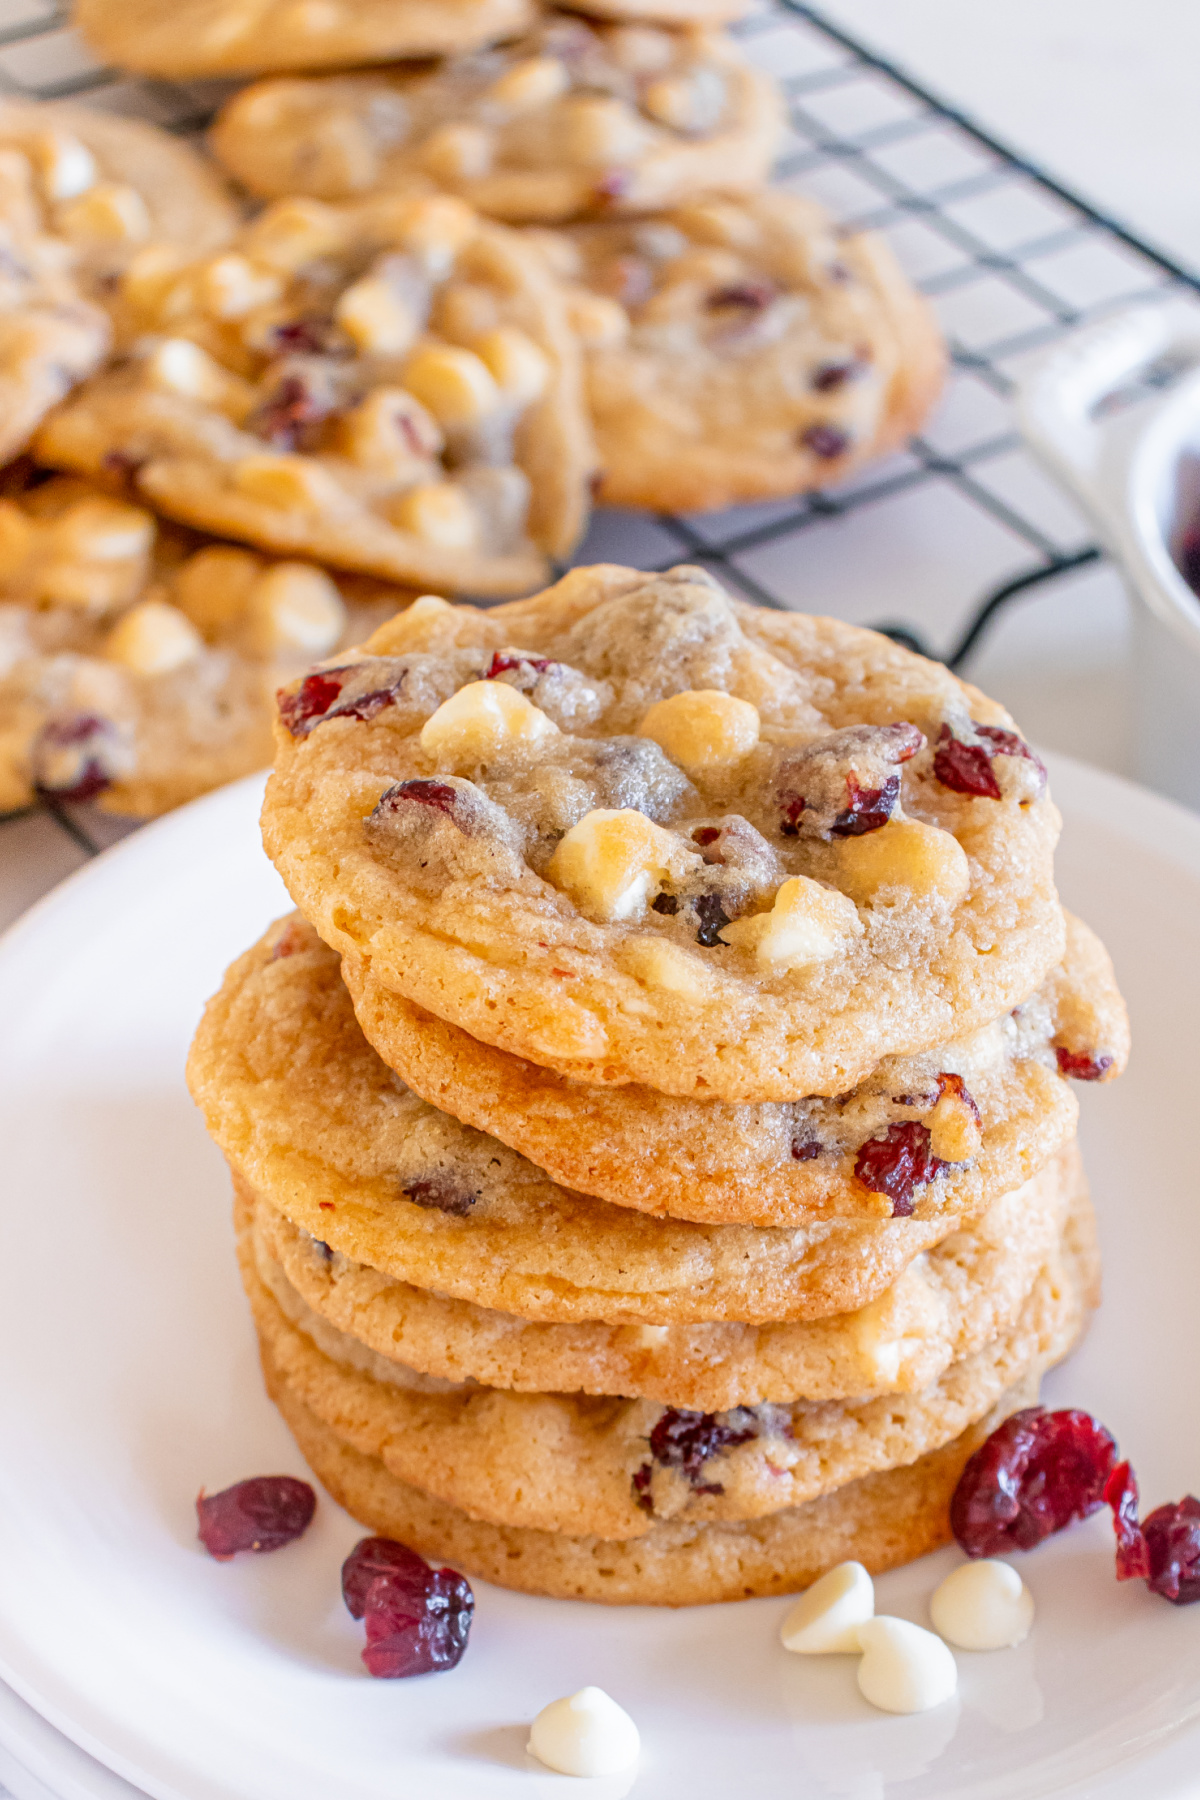 A stack of white chocolate cranberry cookies on a plate.